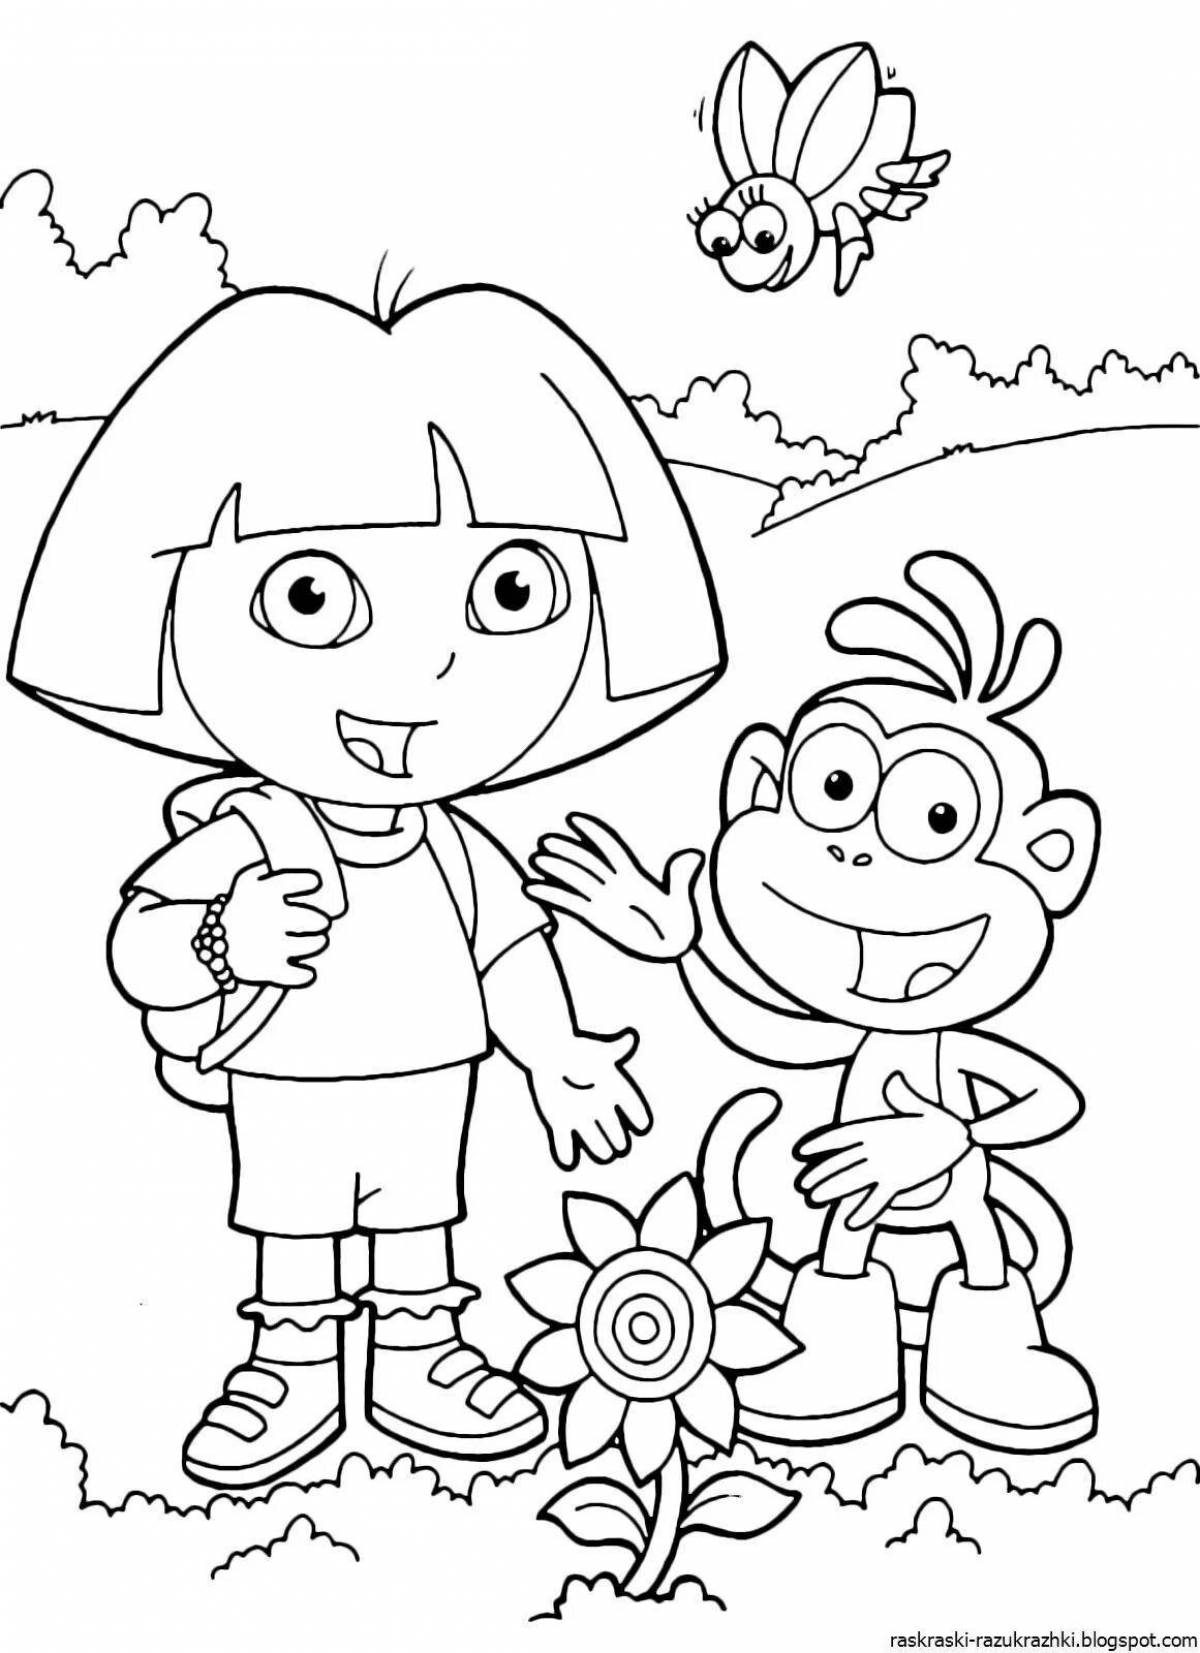 Intriguing coloring book from modern cartoons